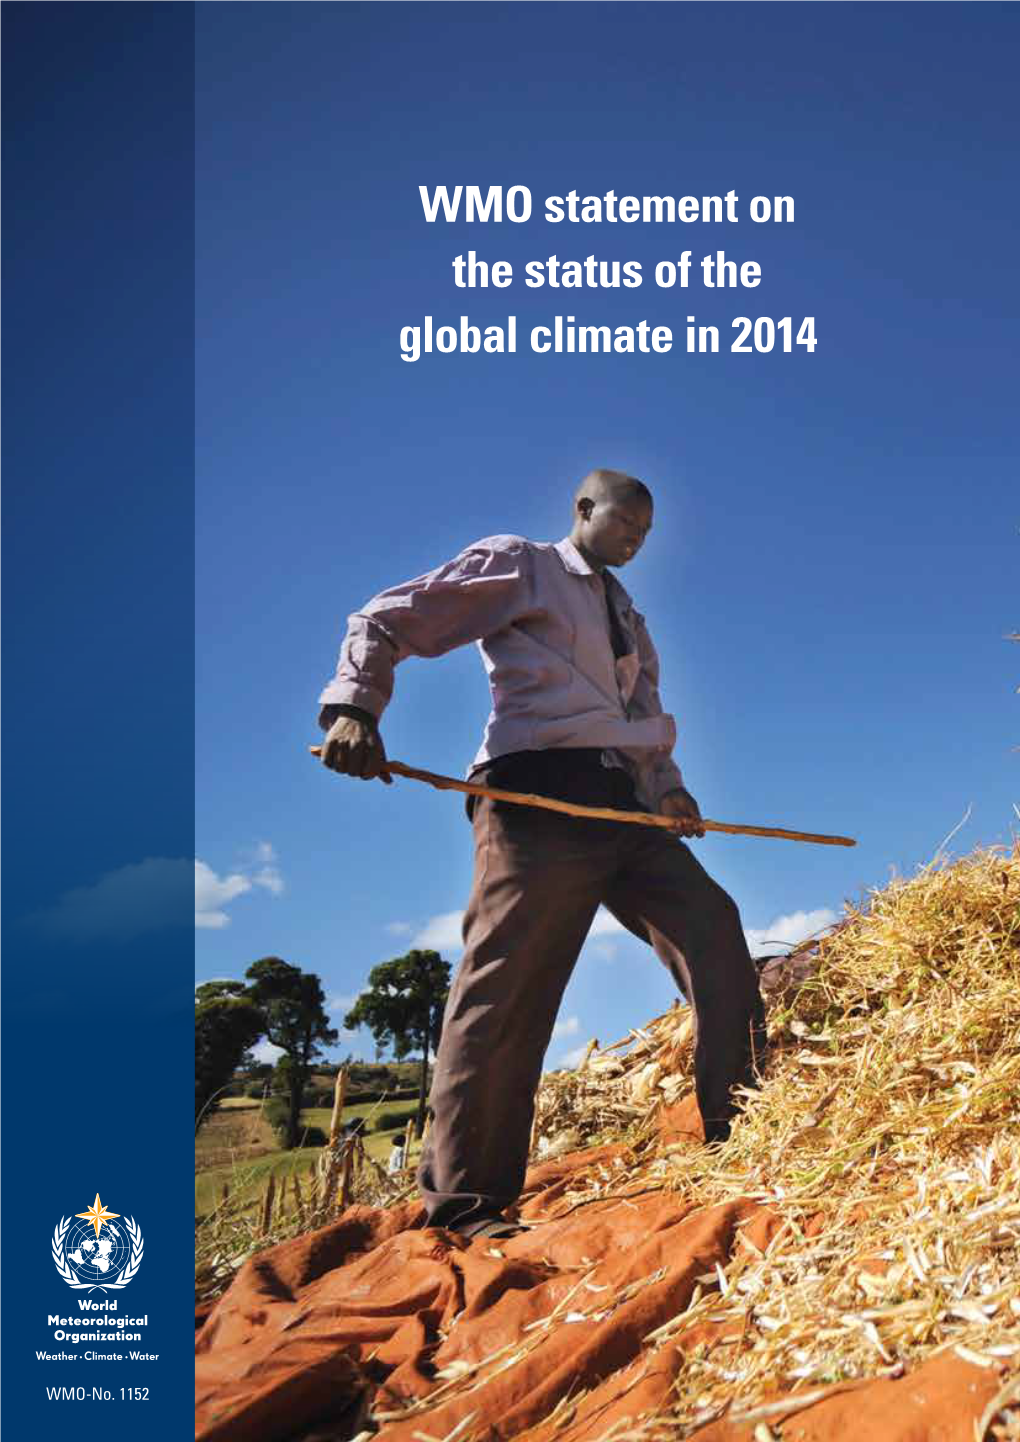 WMO Statement on the Status of the Global Climate in 2014